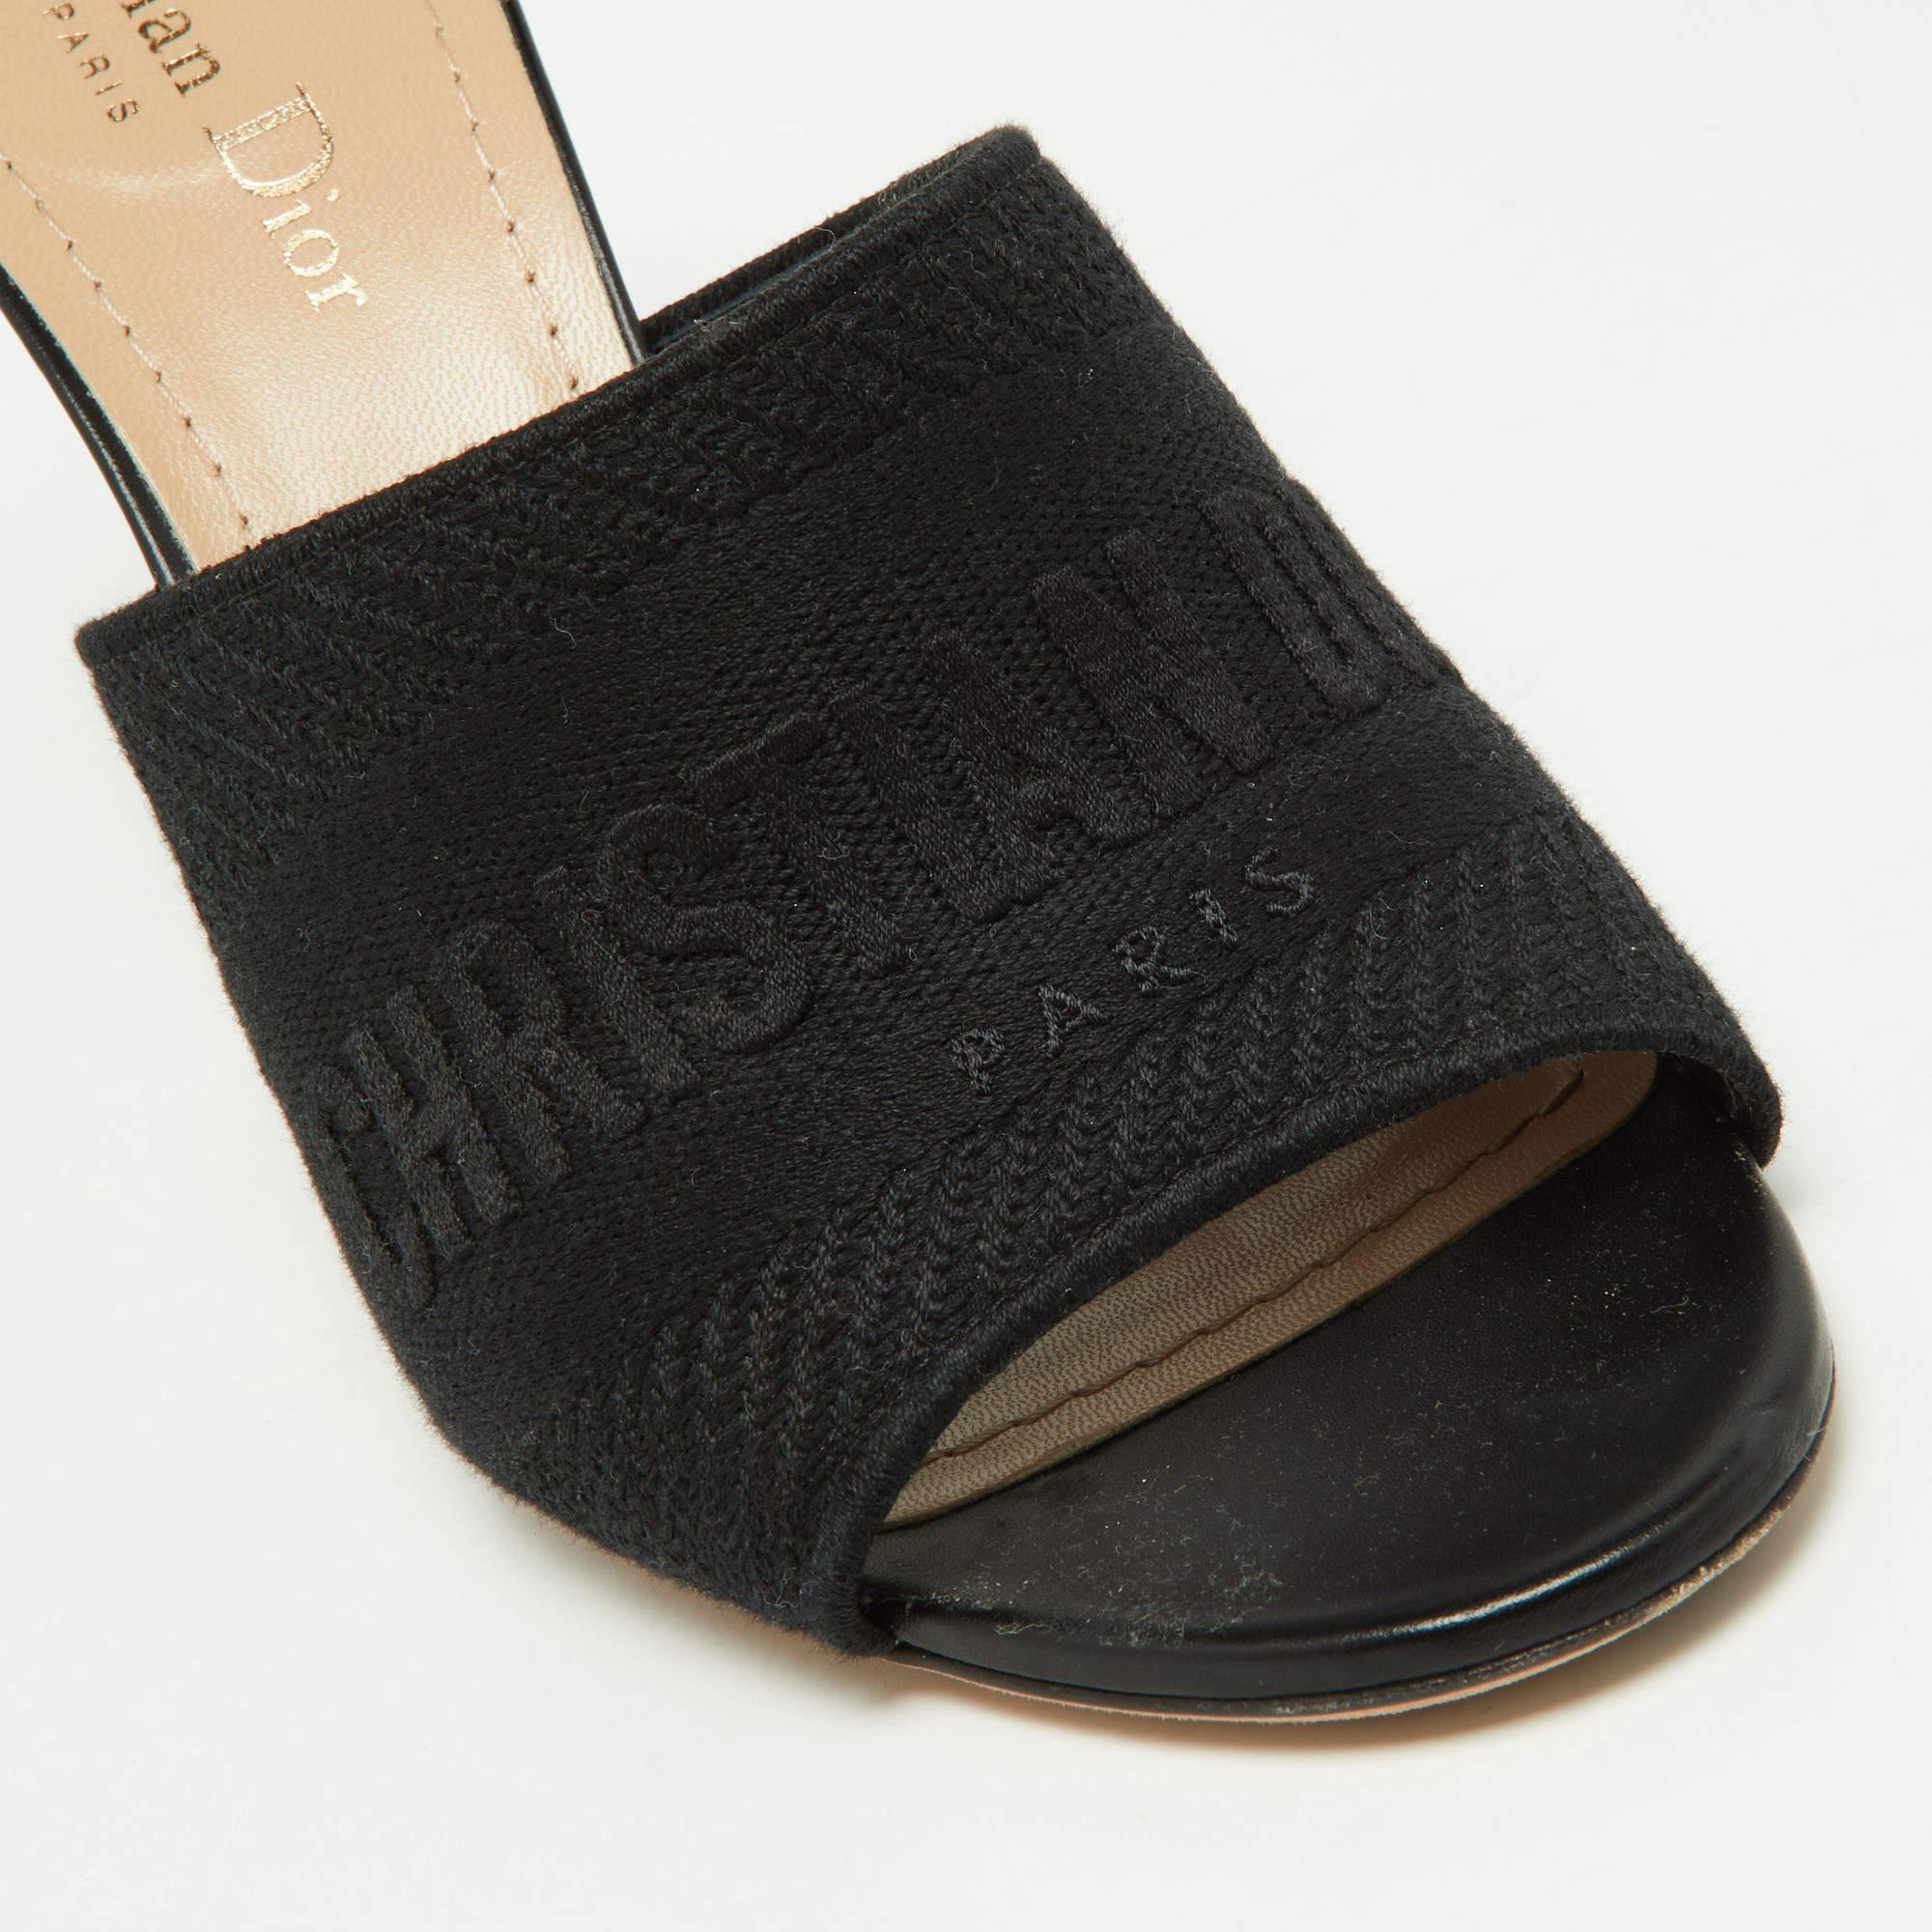 These sandals will frame your feet in a smart manner. Crafted from quality materials, they display a classy design and comfortable insoles.

Includes: Original Dustbag